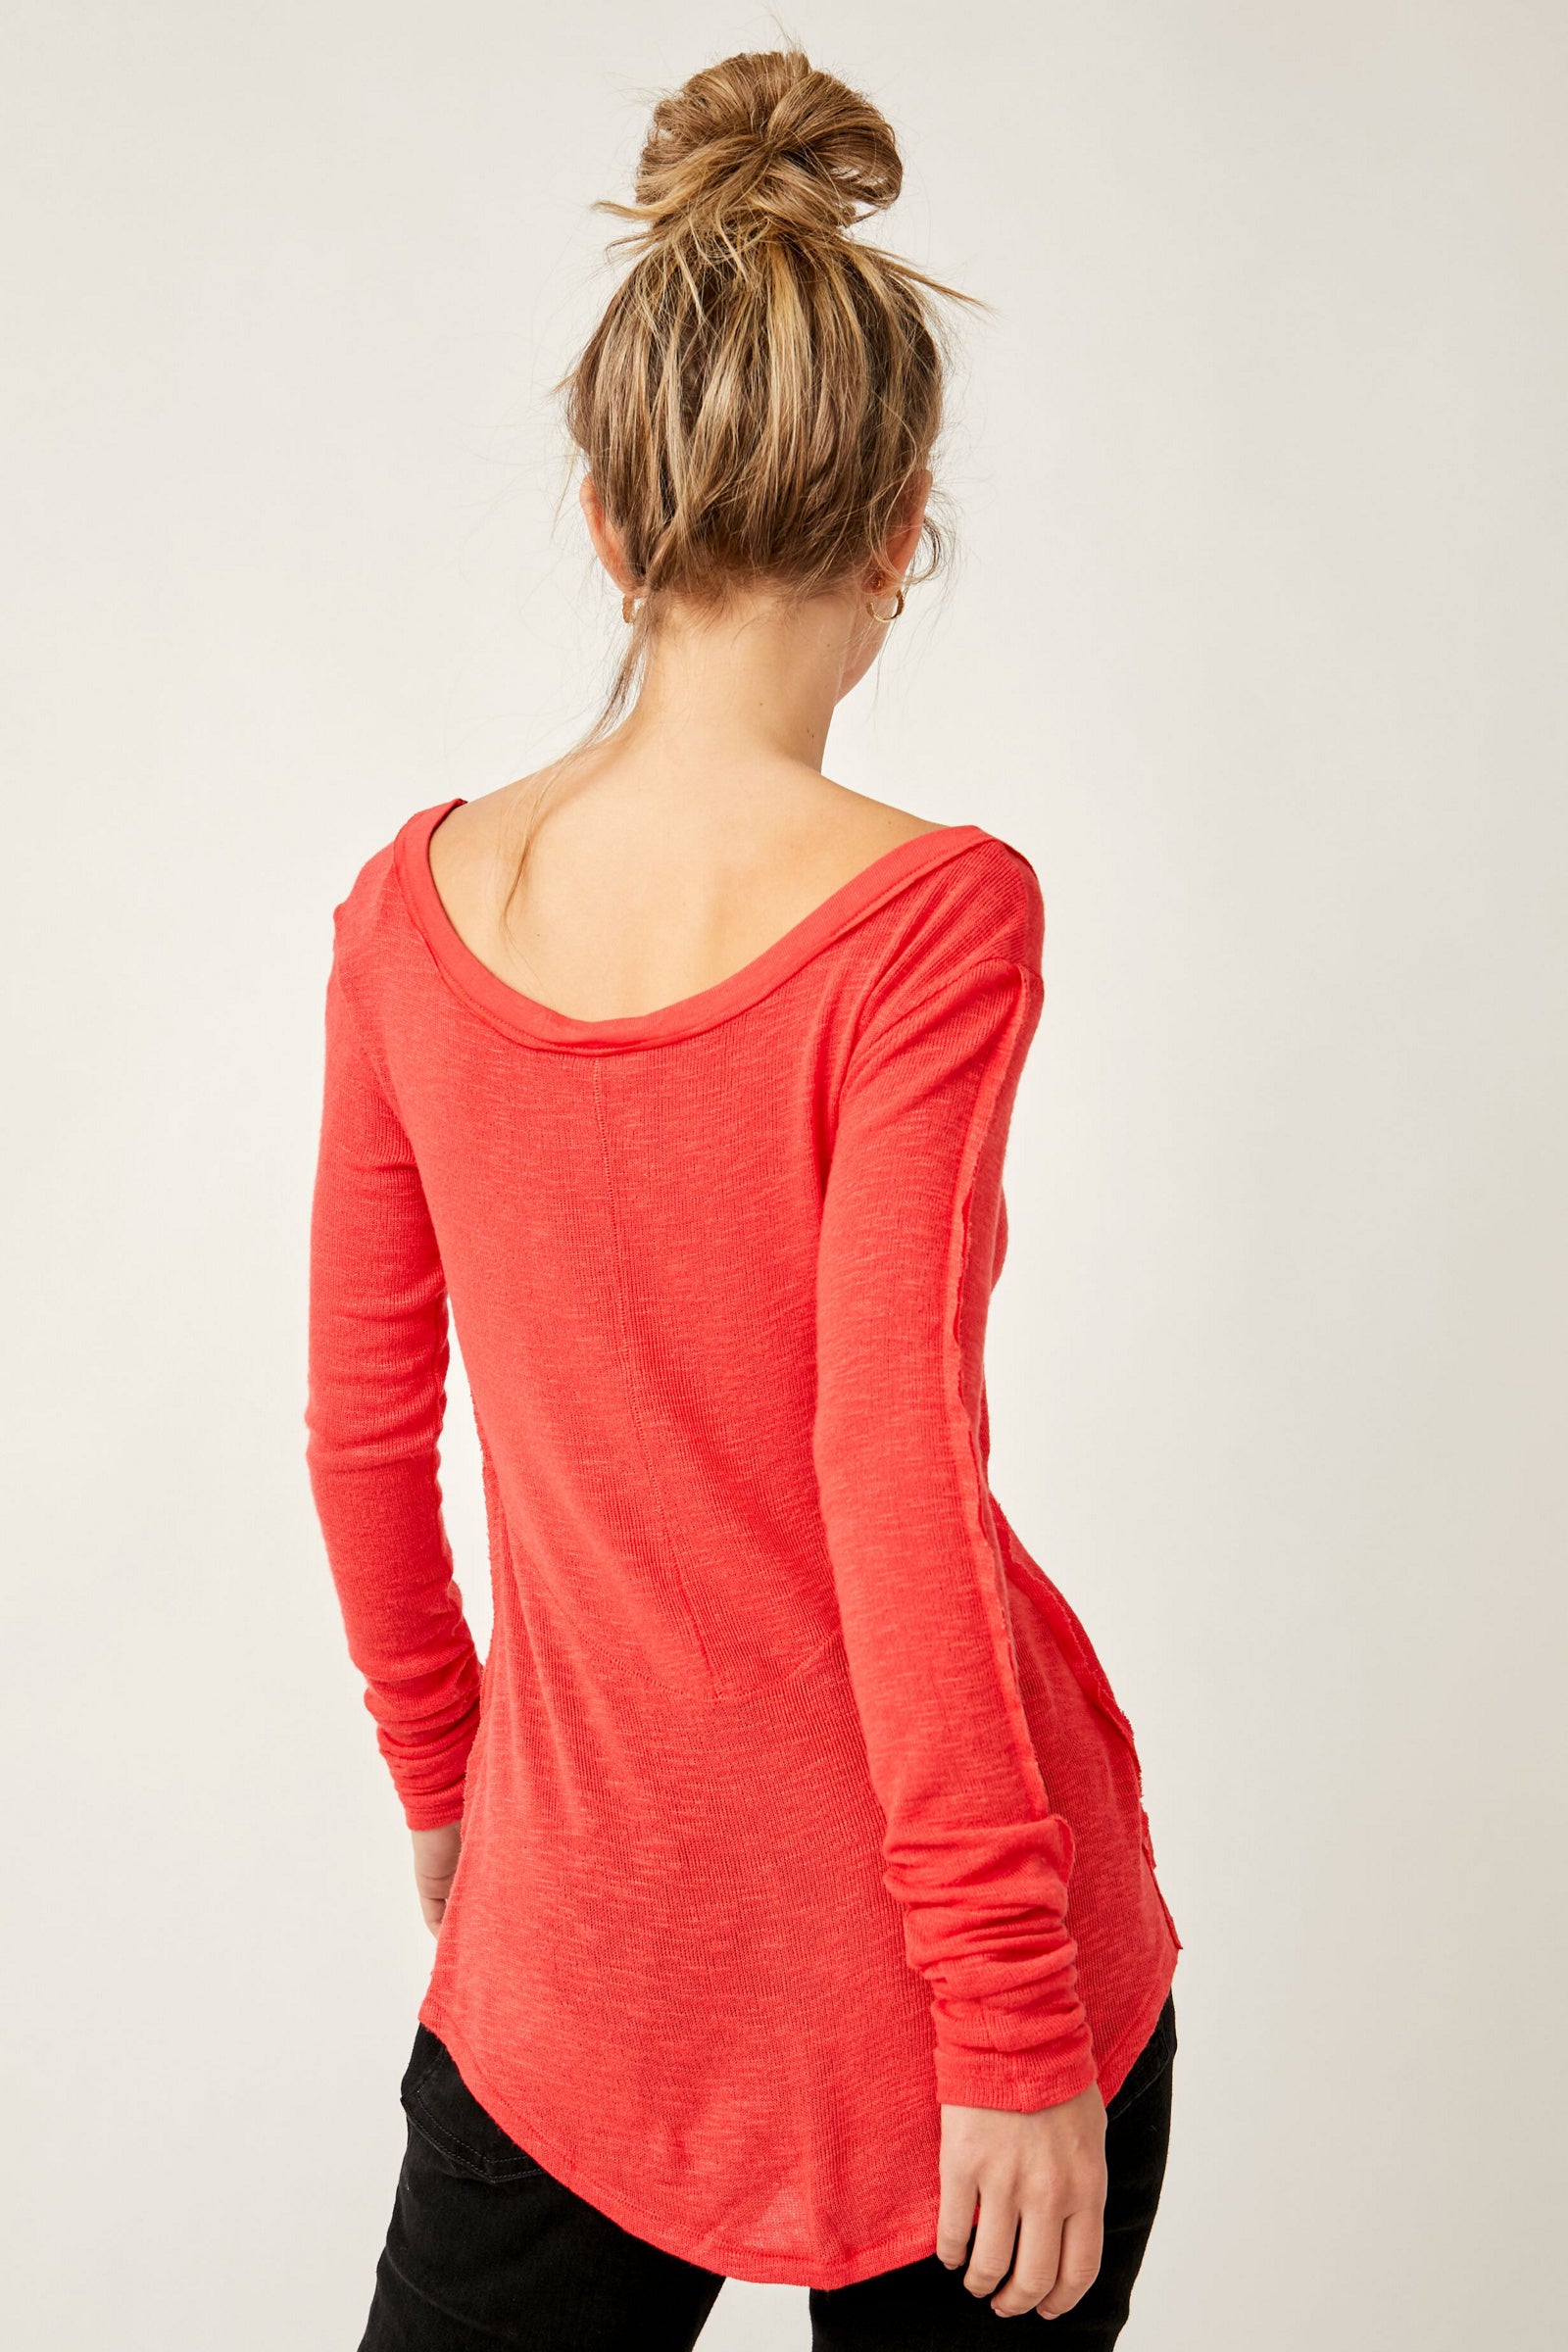 CABIN FEVER LAYERING TOP